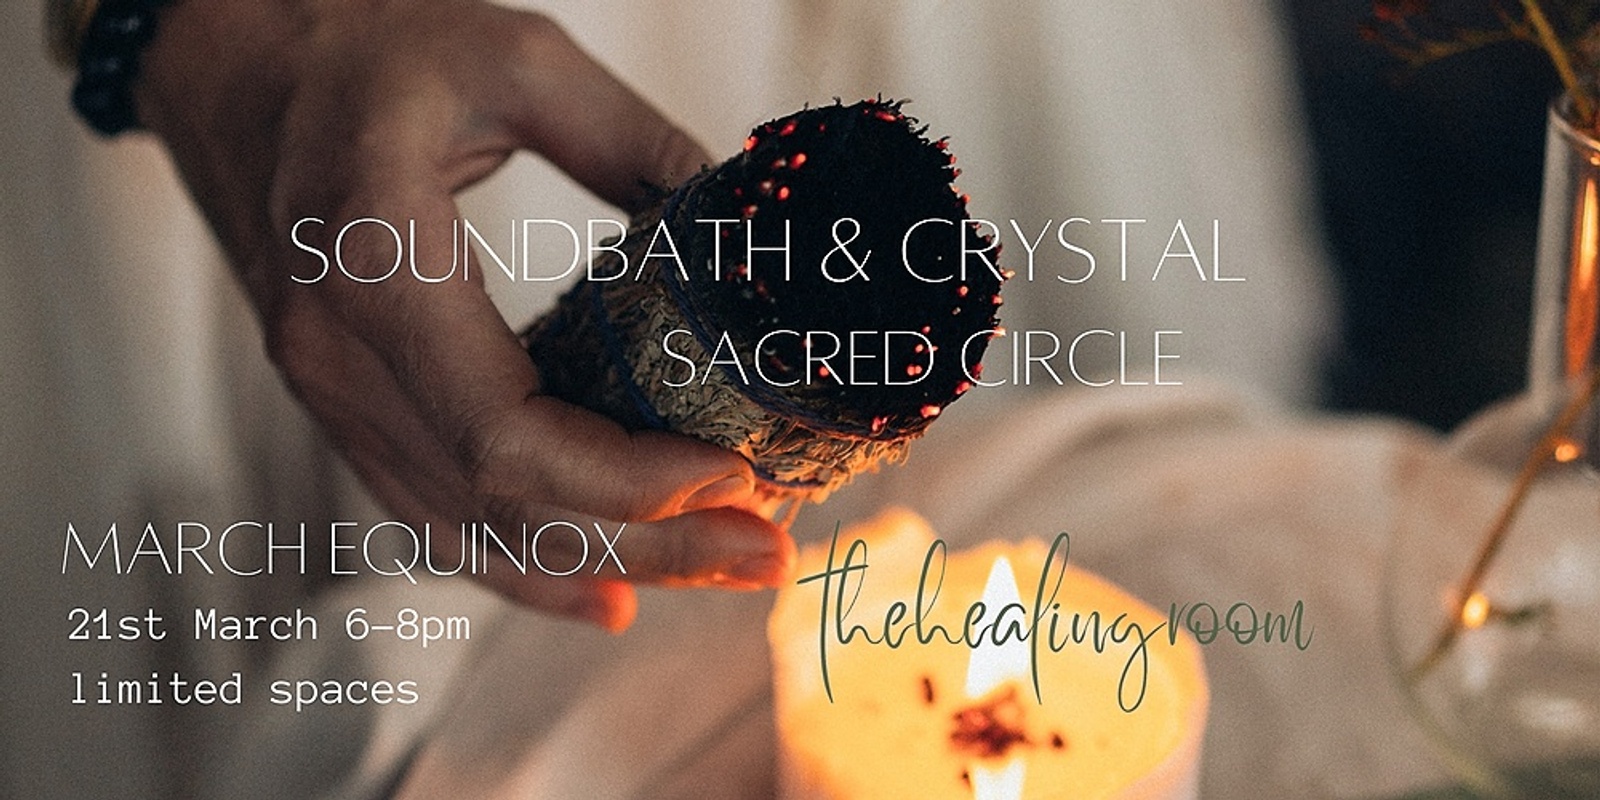 Sound Bath & Crystal Sacred Circle for March Equinox